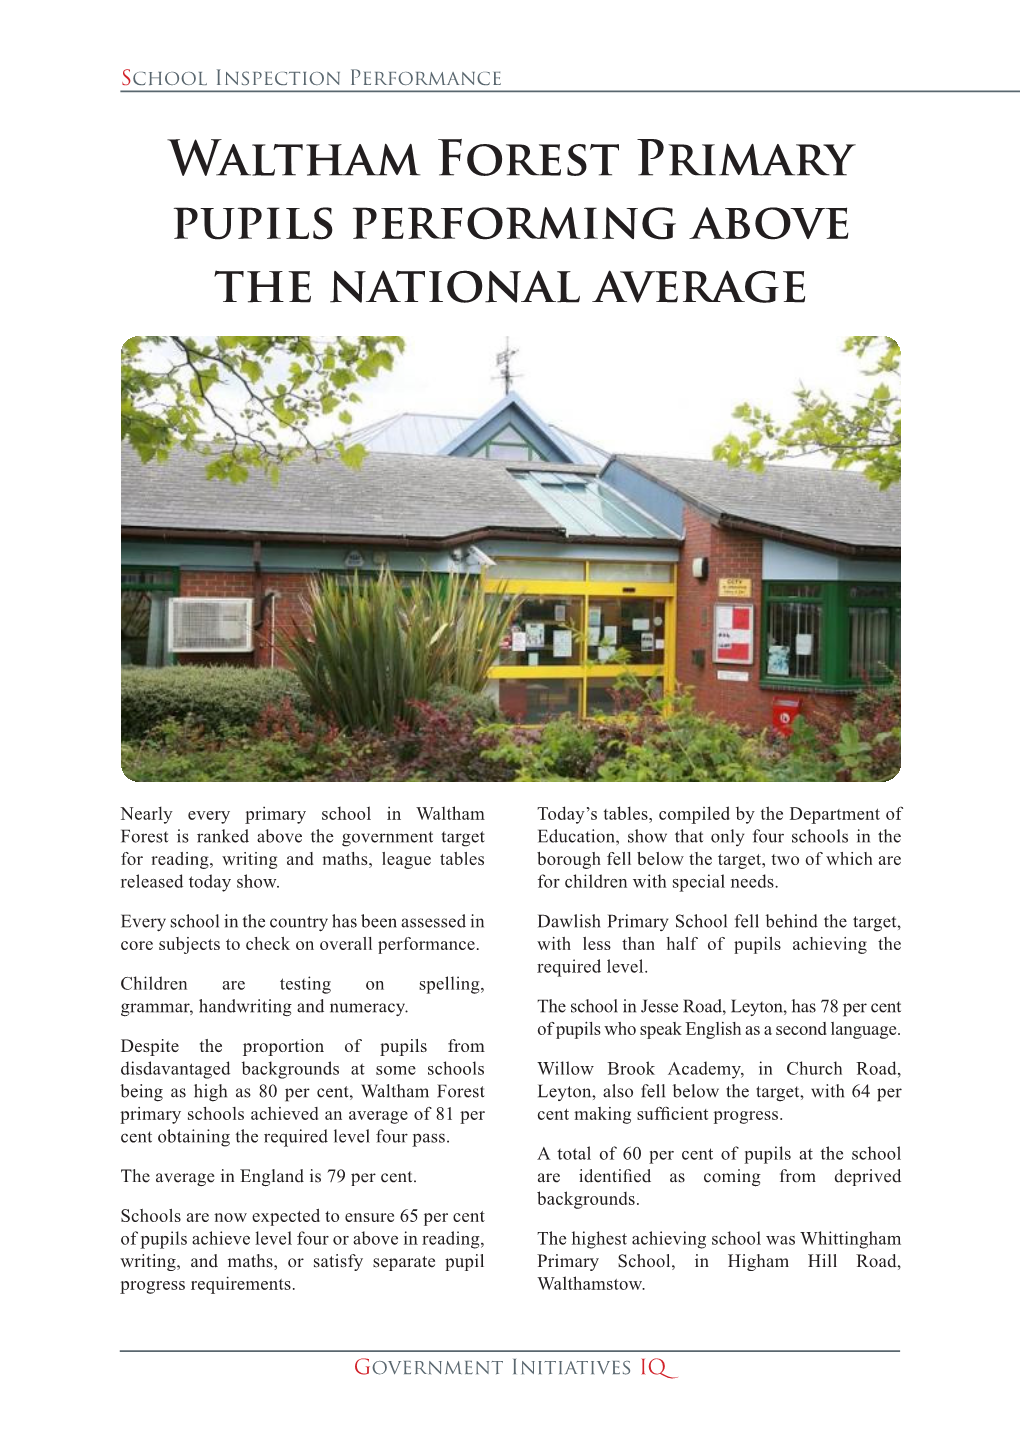 Waltham Forest Primary Pupils Performing Above the National Average